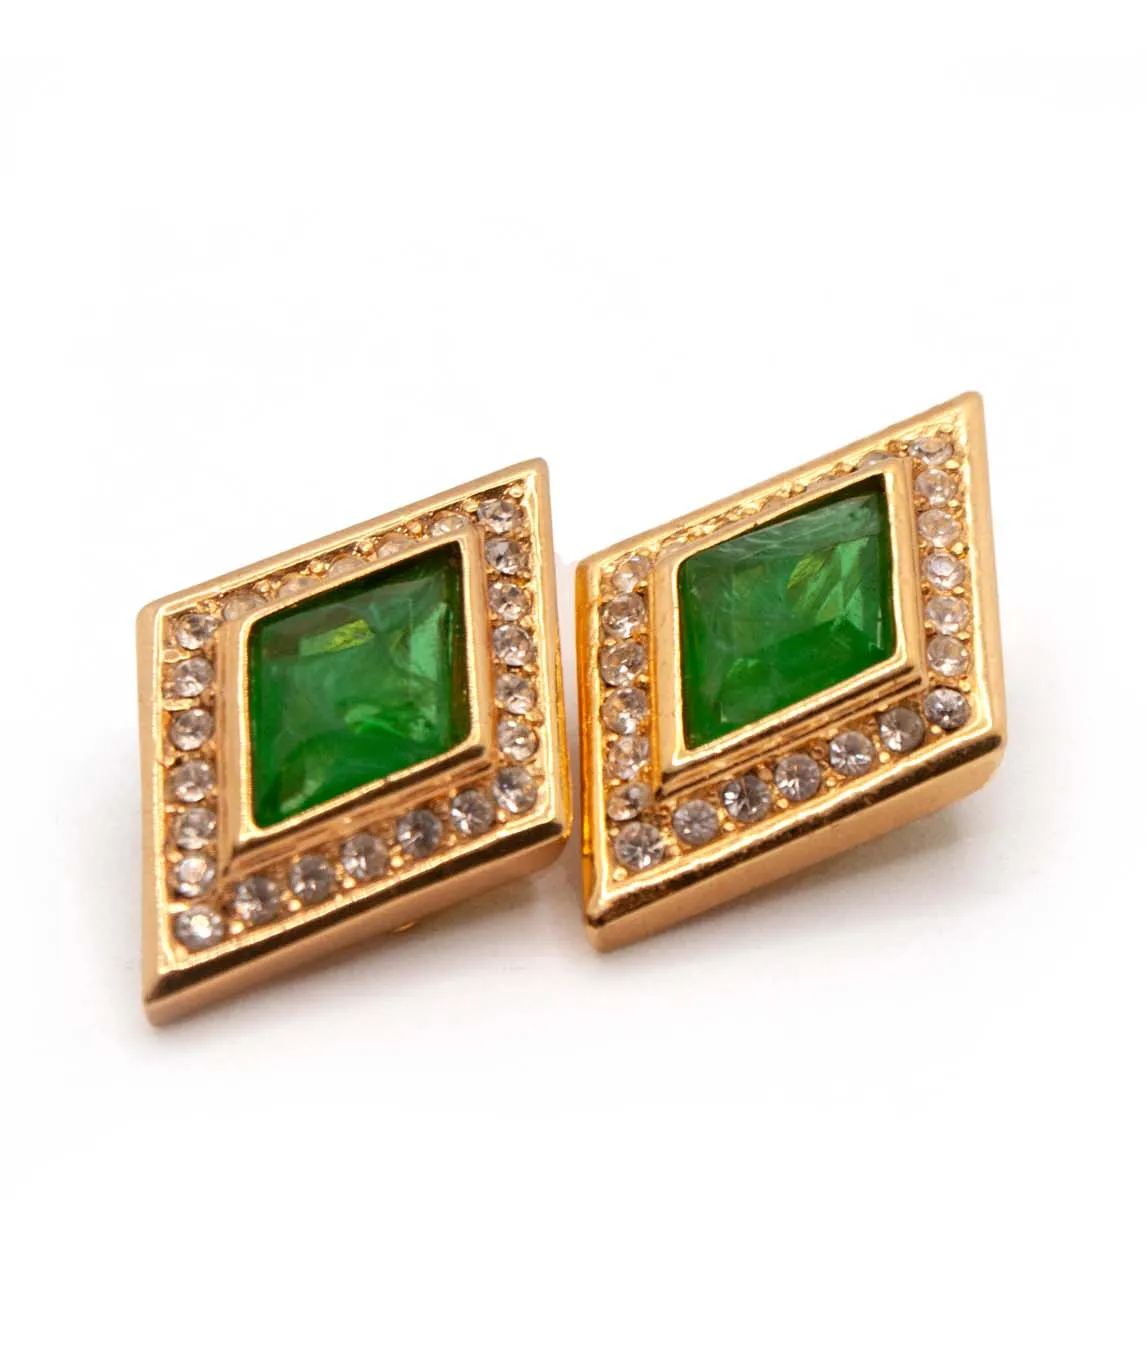 Vintage Christian Dior diamond shaped clip earrings with flawed emerald art glass and rhinestones